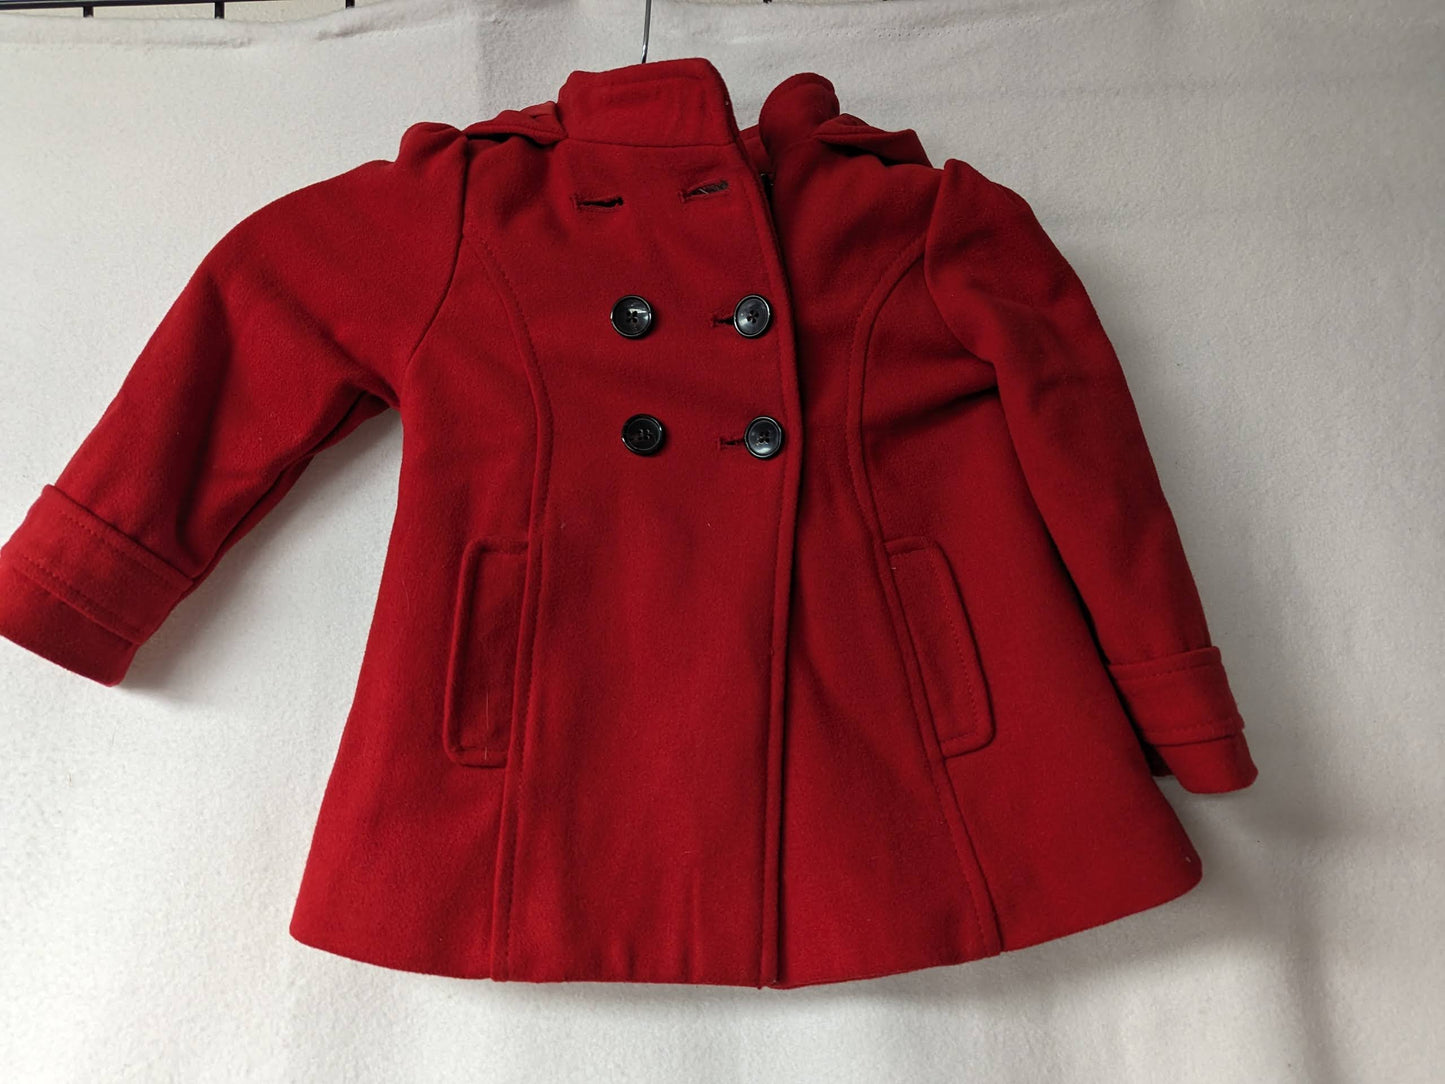 Old Navy Youth Hooded Winter Jacket Coat Size Youth 3T Color Red Condition Used